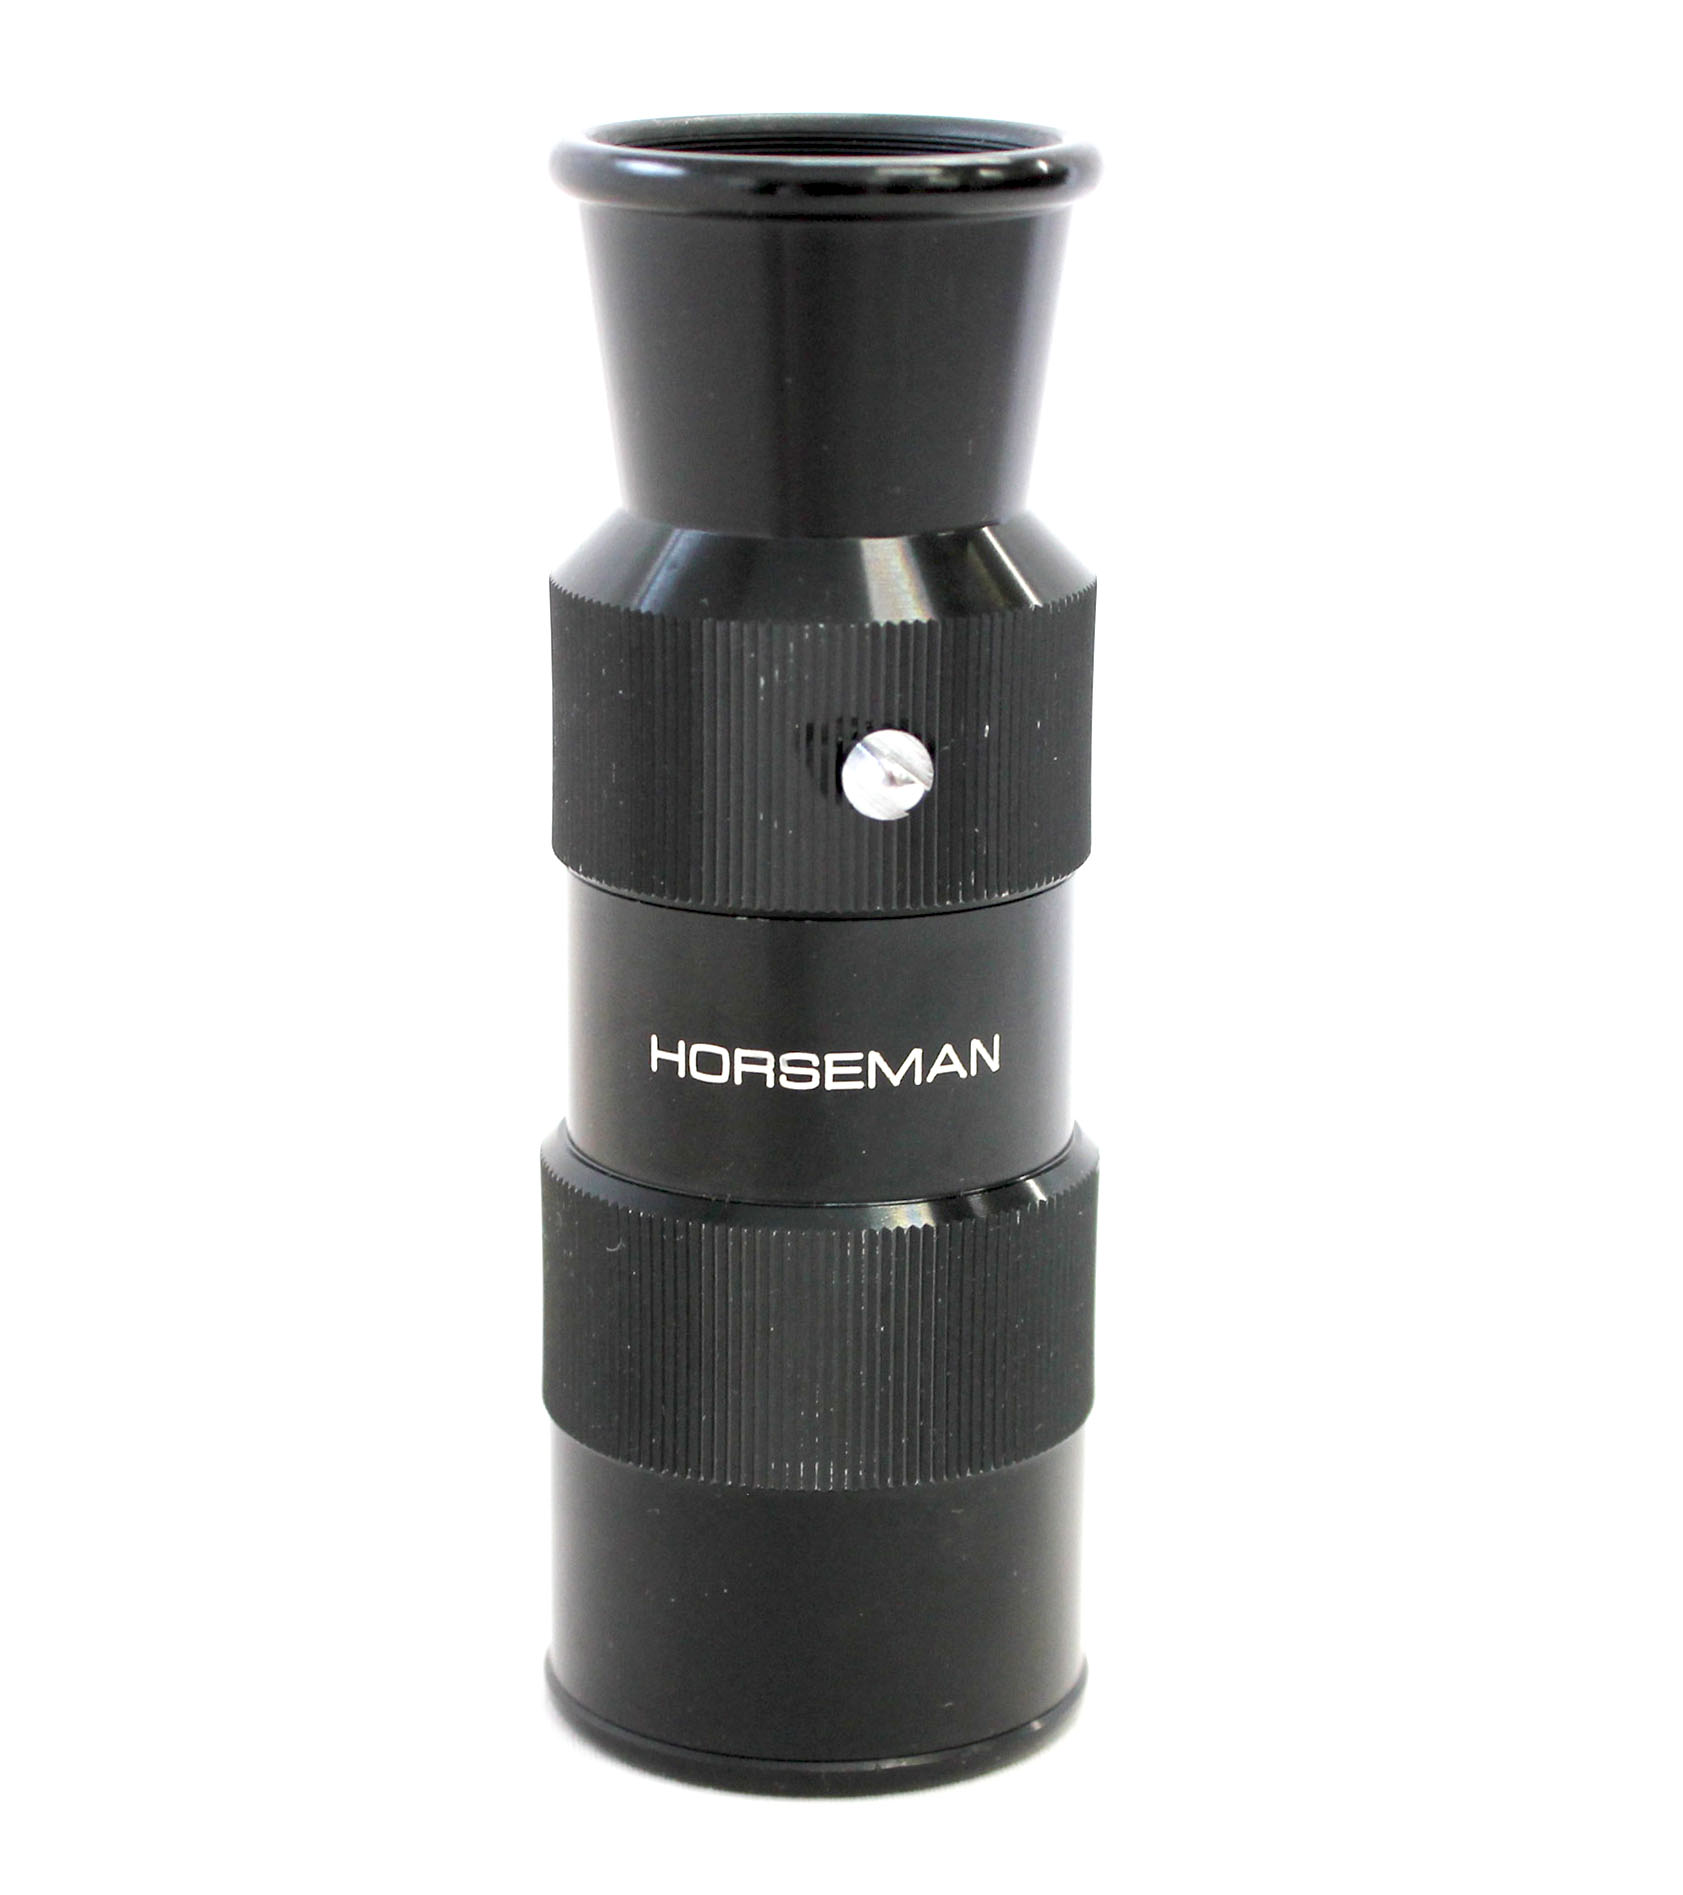 Japan Used Camera Shop | [Excellent+++++] Horseman Focusing Magnifier Long Lupe 6x from Japan